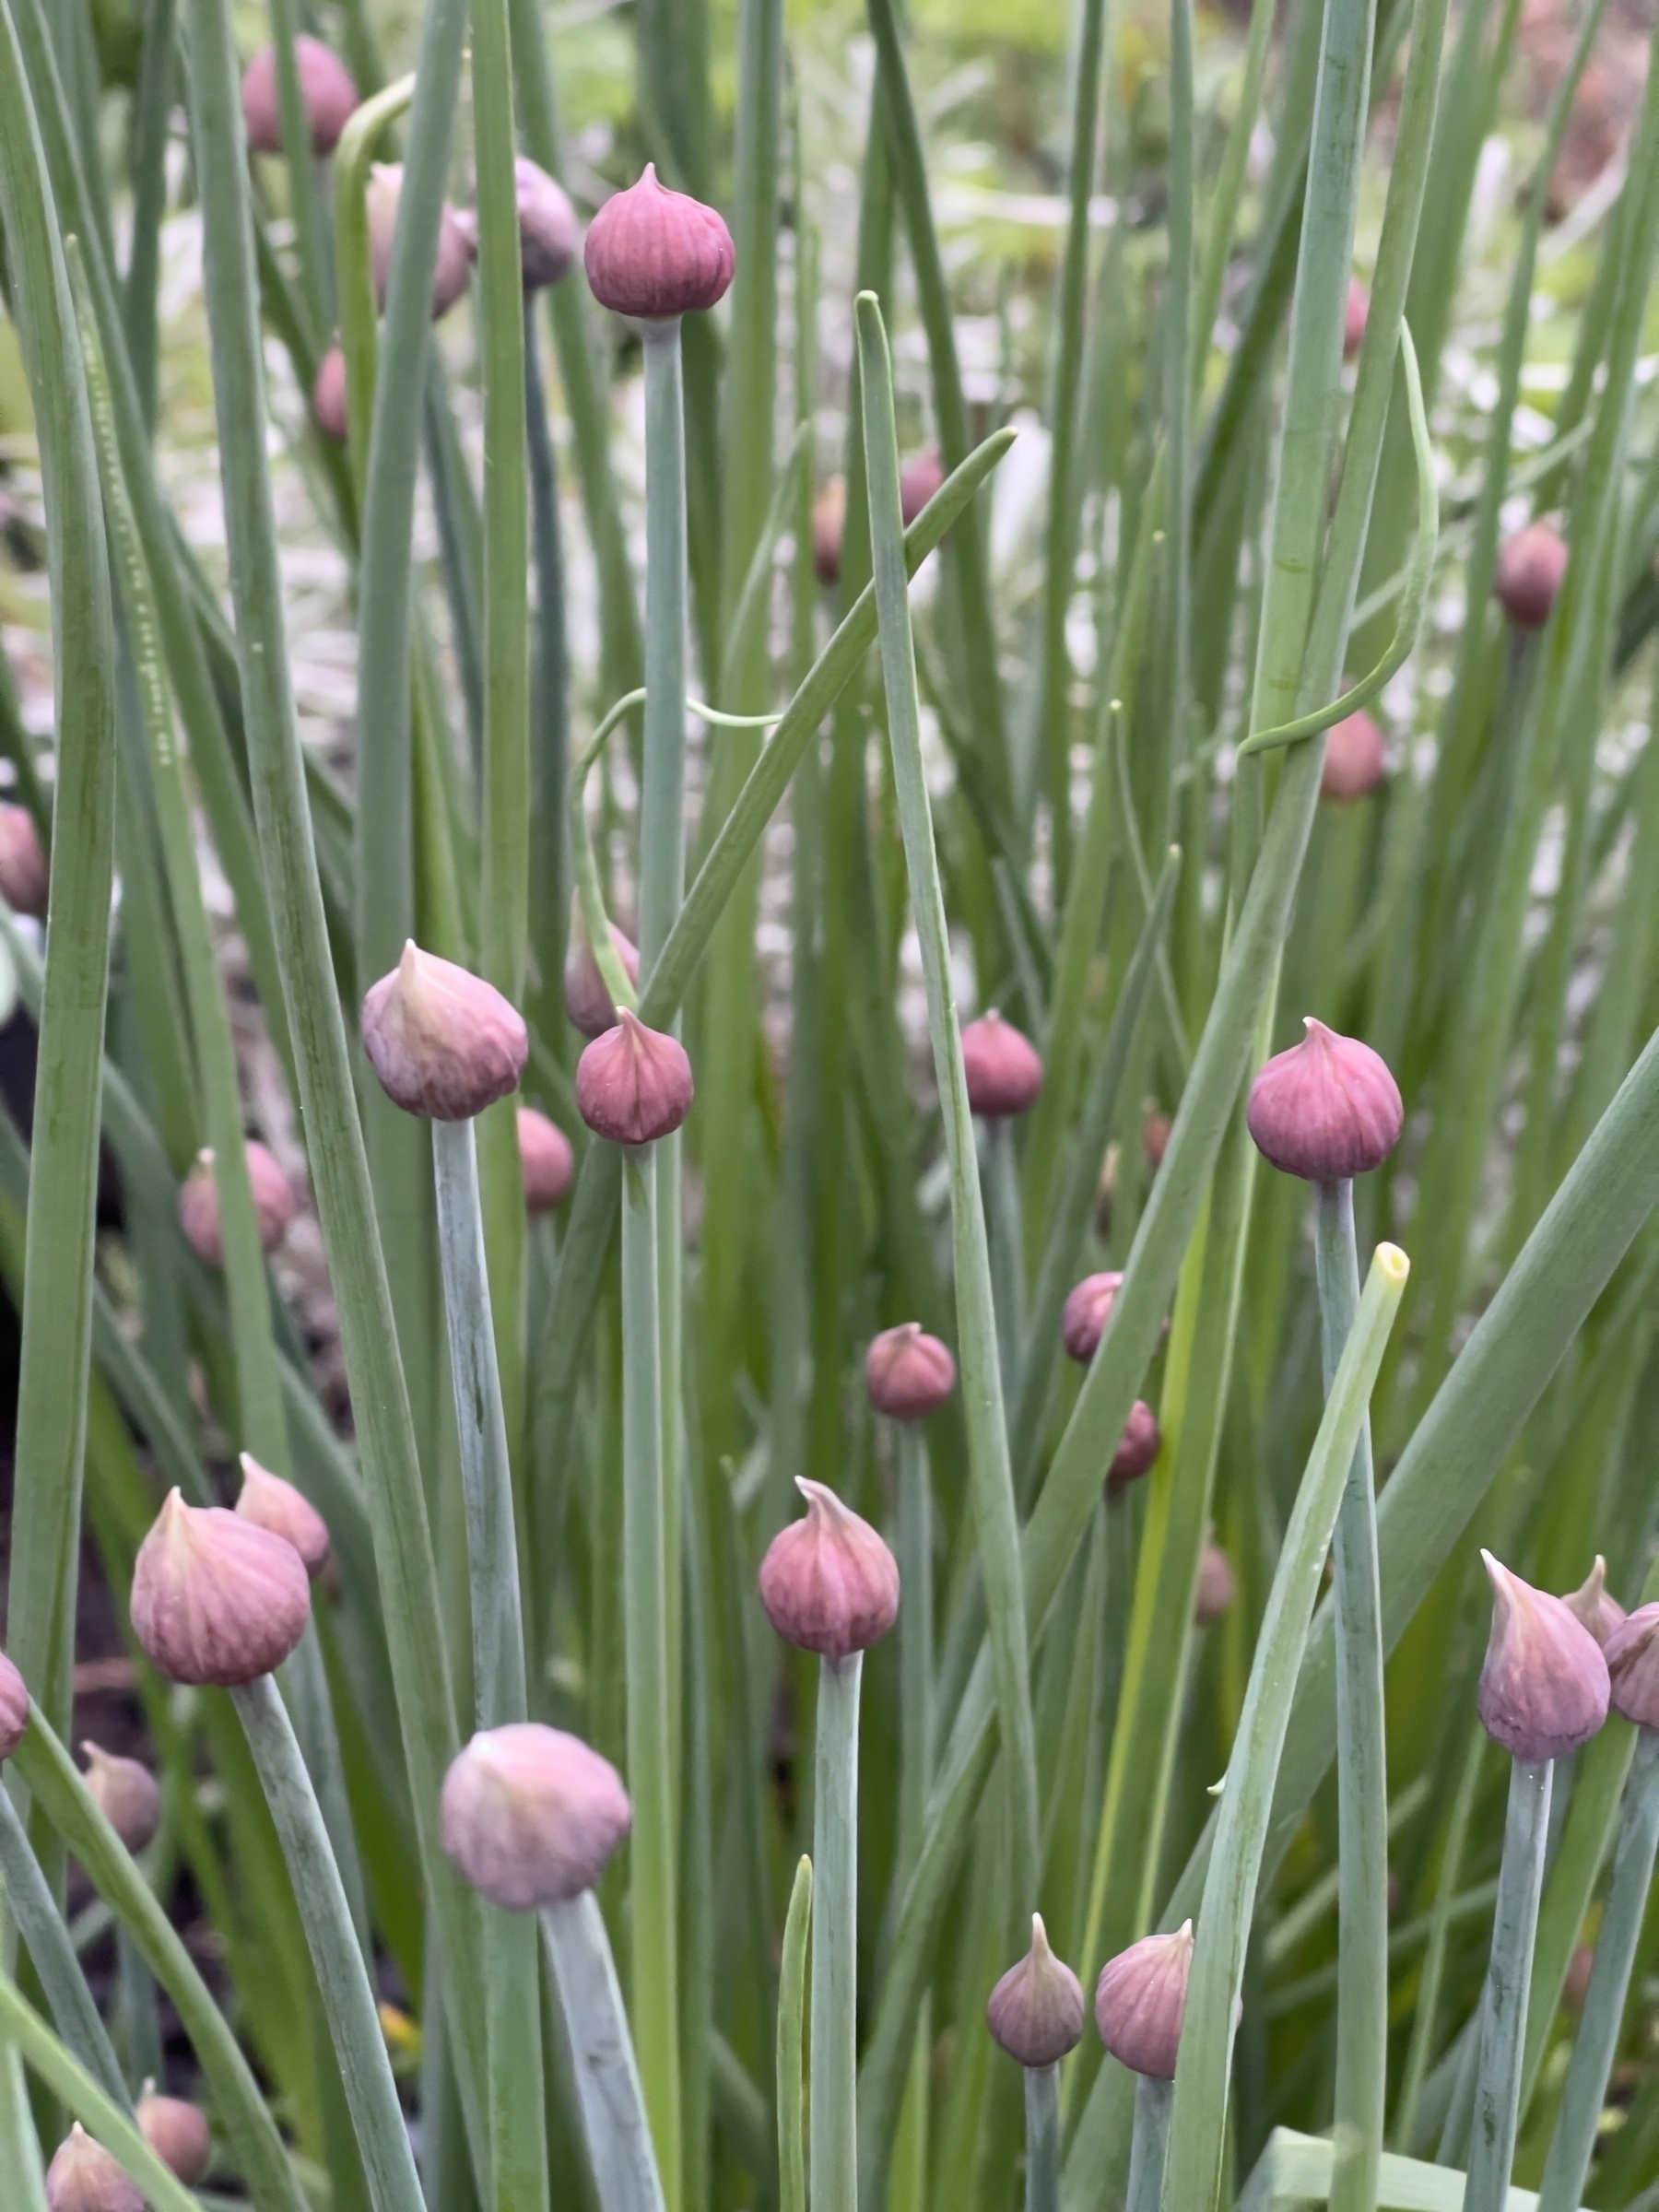 Chive blossoms.